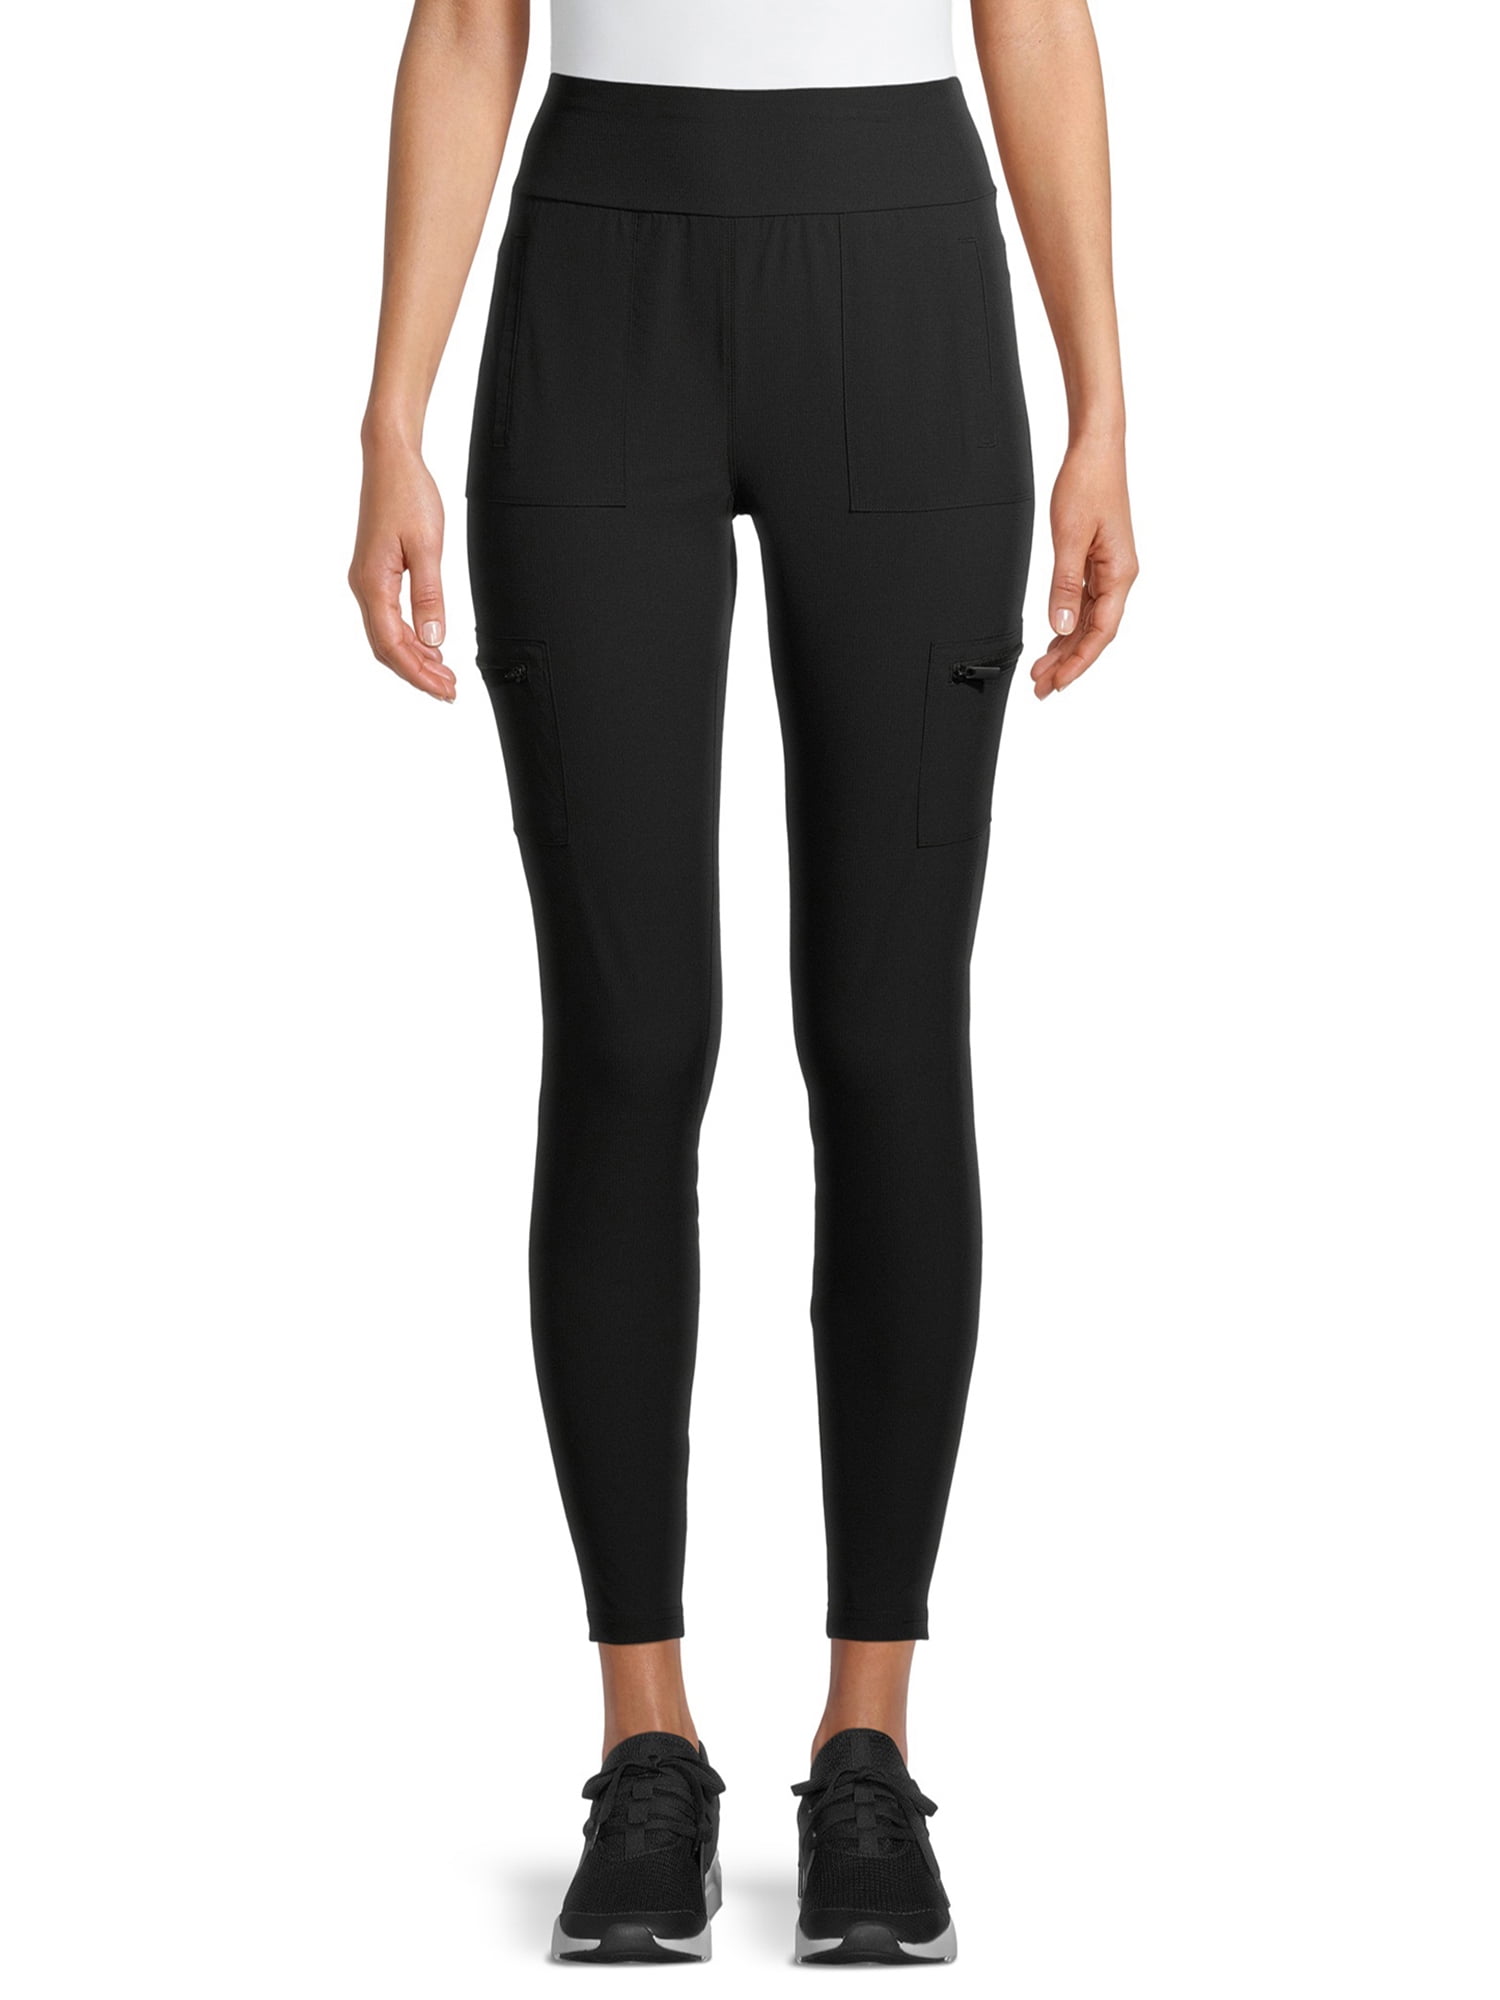 Athletic Works Women's Active Hybrid Woven Pants